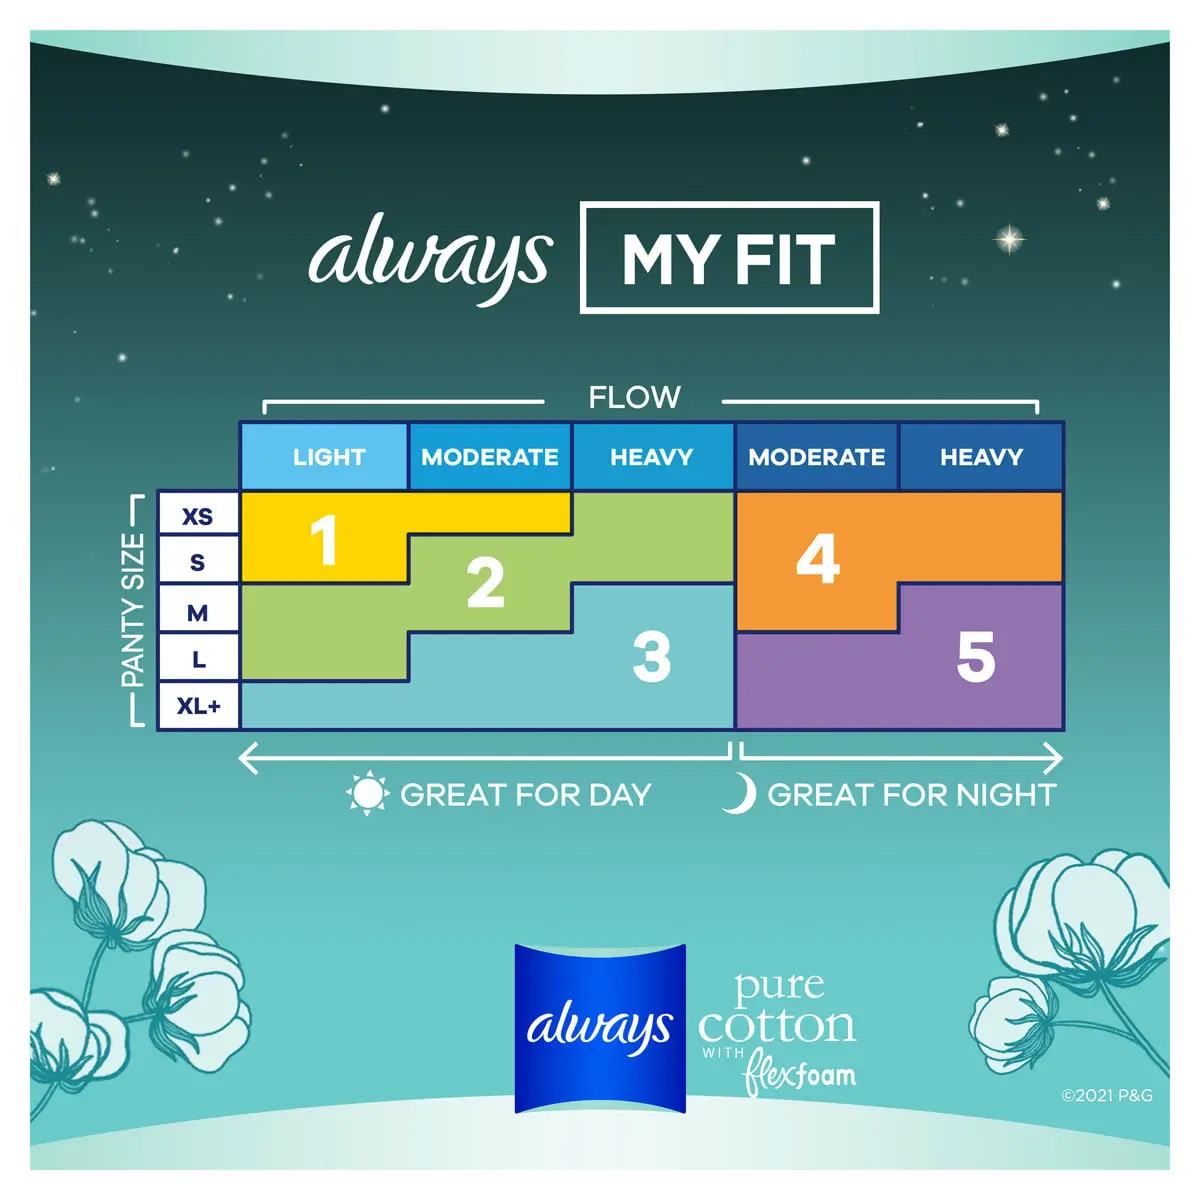 Always-Pure Cotton-Night-My-Fit